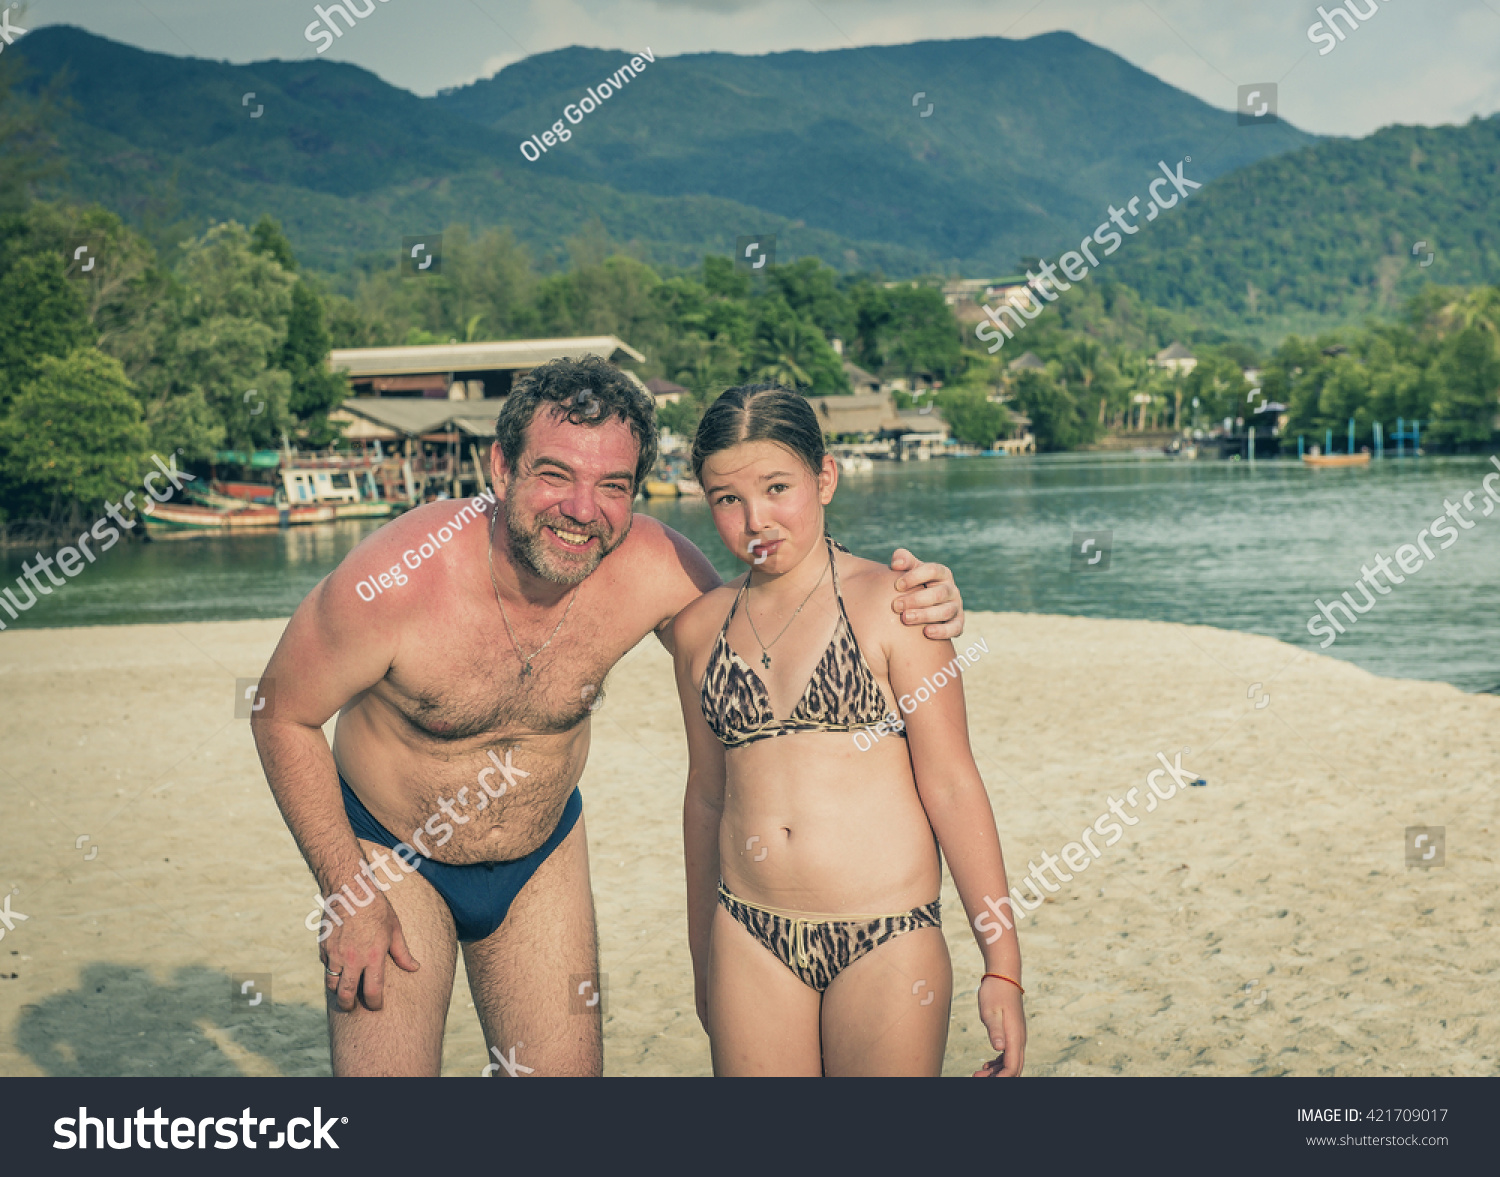 Nudist father dad daughters